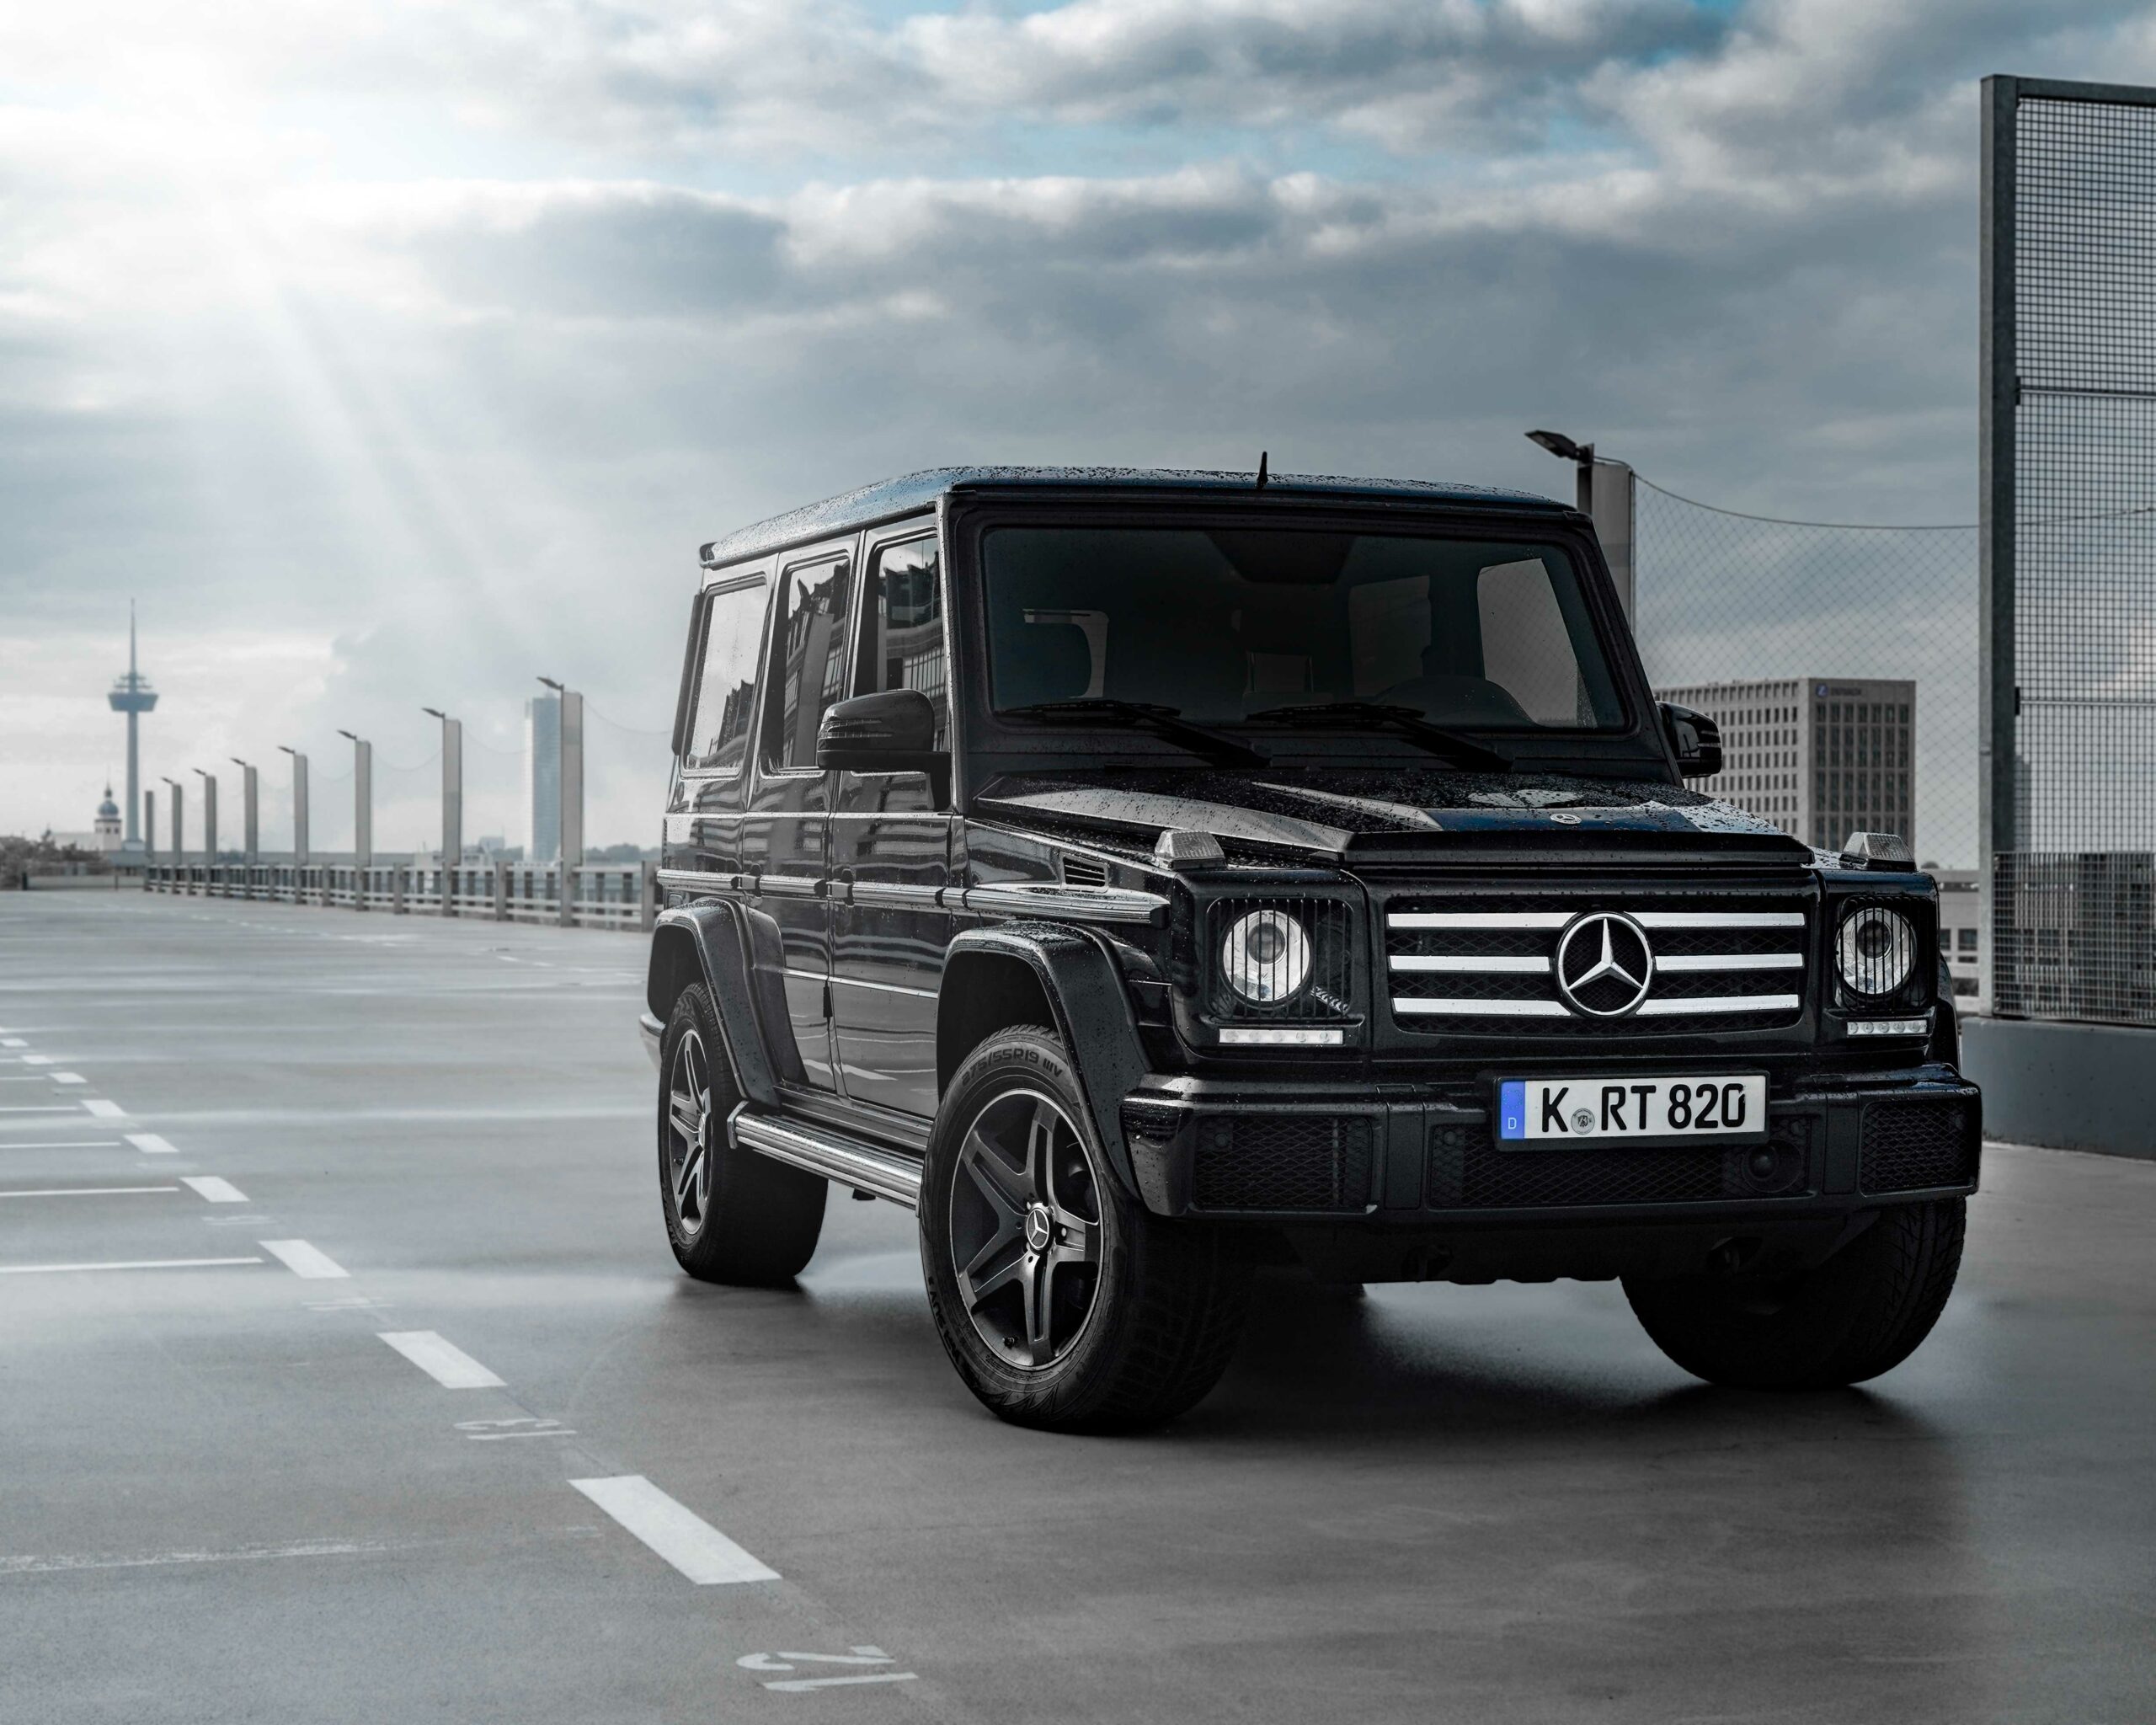 Mercedes G500 side view rent time front view parking slot cologne